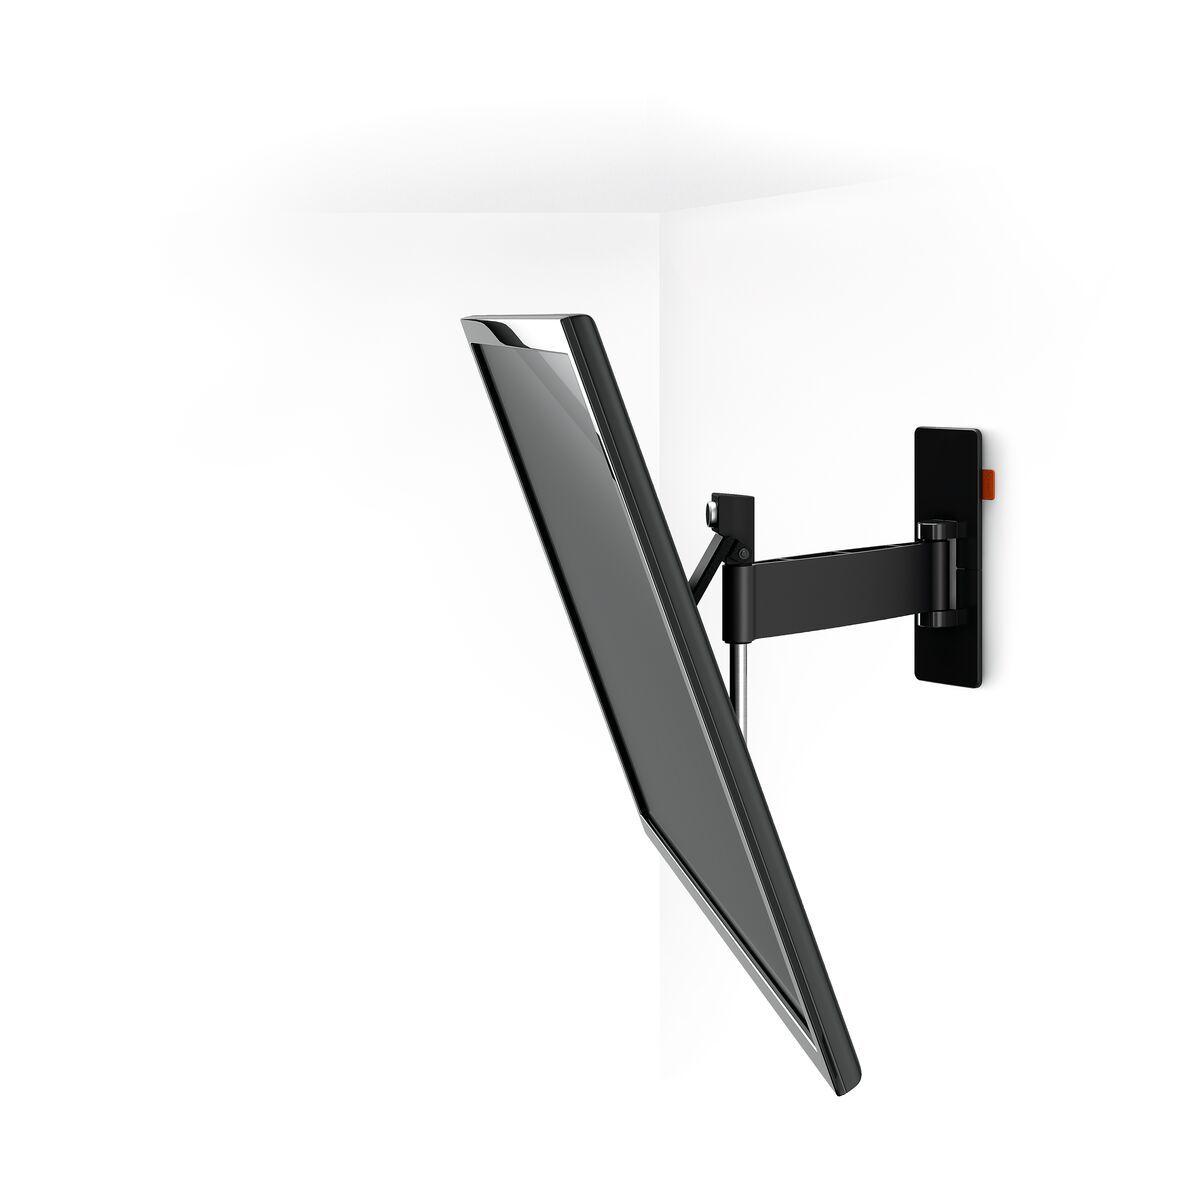 Vogel's WALL 3325 Full-Motion TV Wall Mount - Suitable for 40 up to 65 inch TVs - Motion (up to 120°) - Tilt up to 20° - White wall